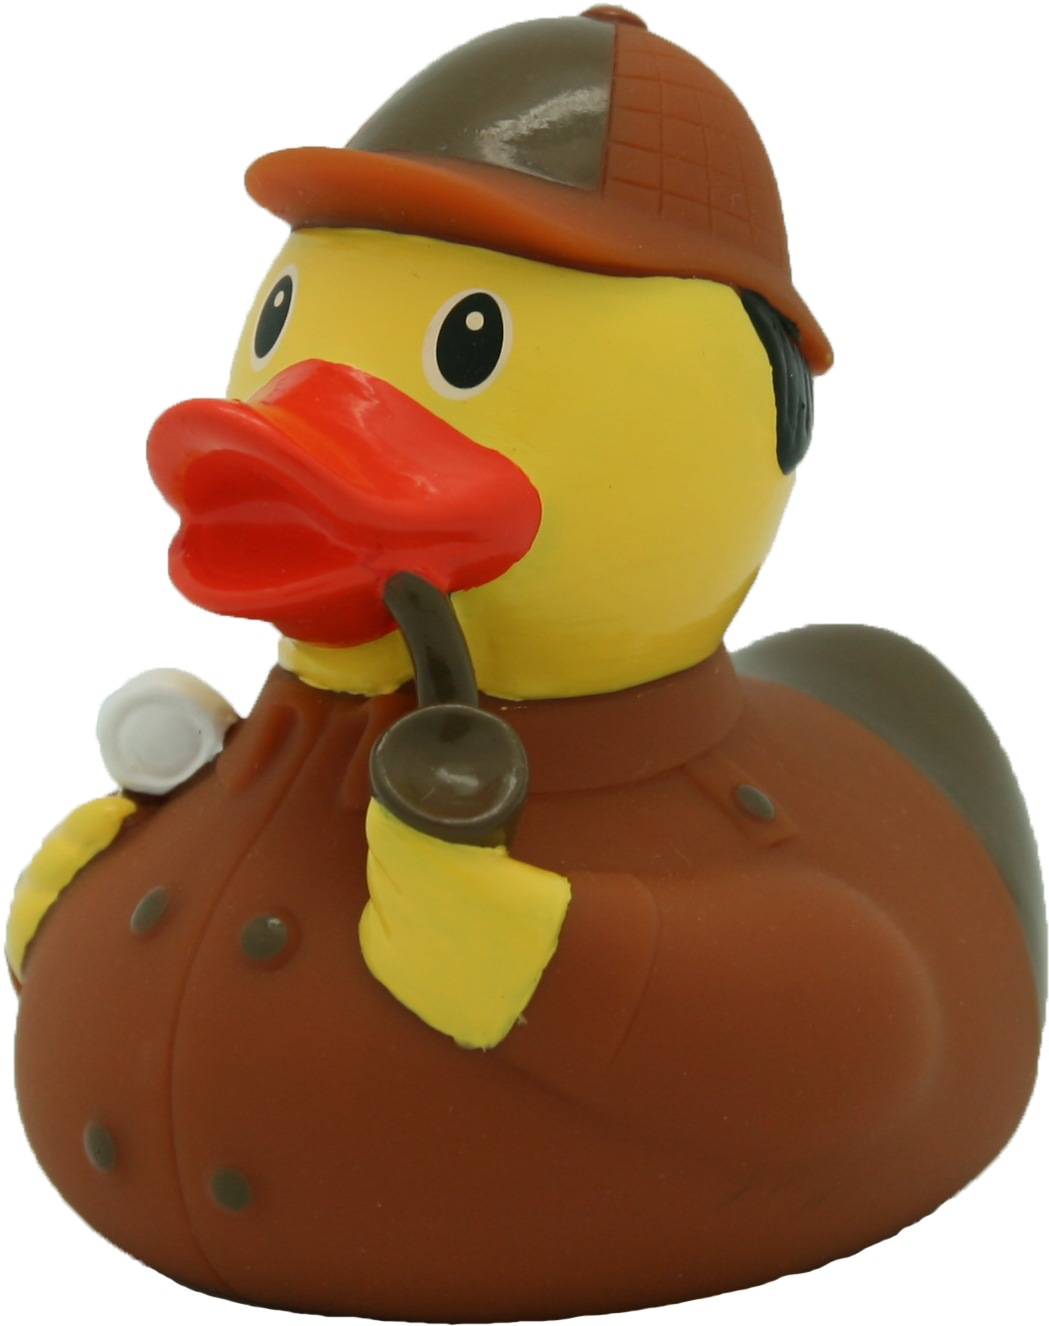 Detective Rubber Duck Figurine.png PNG